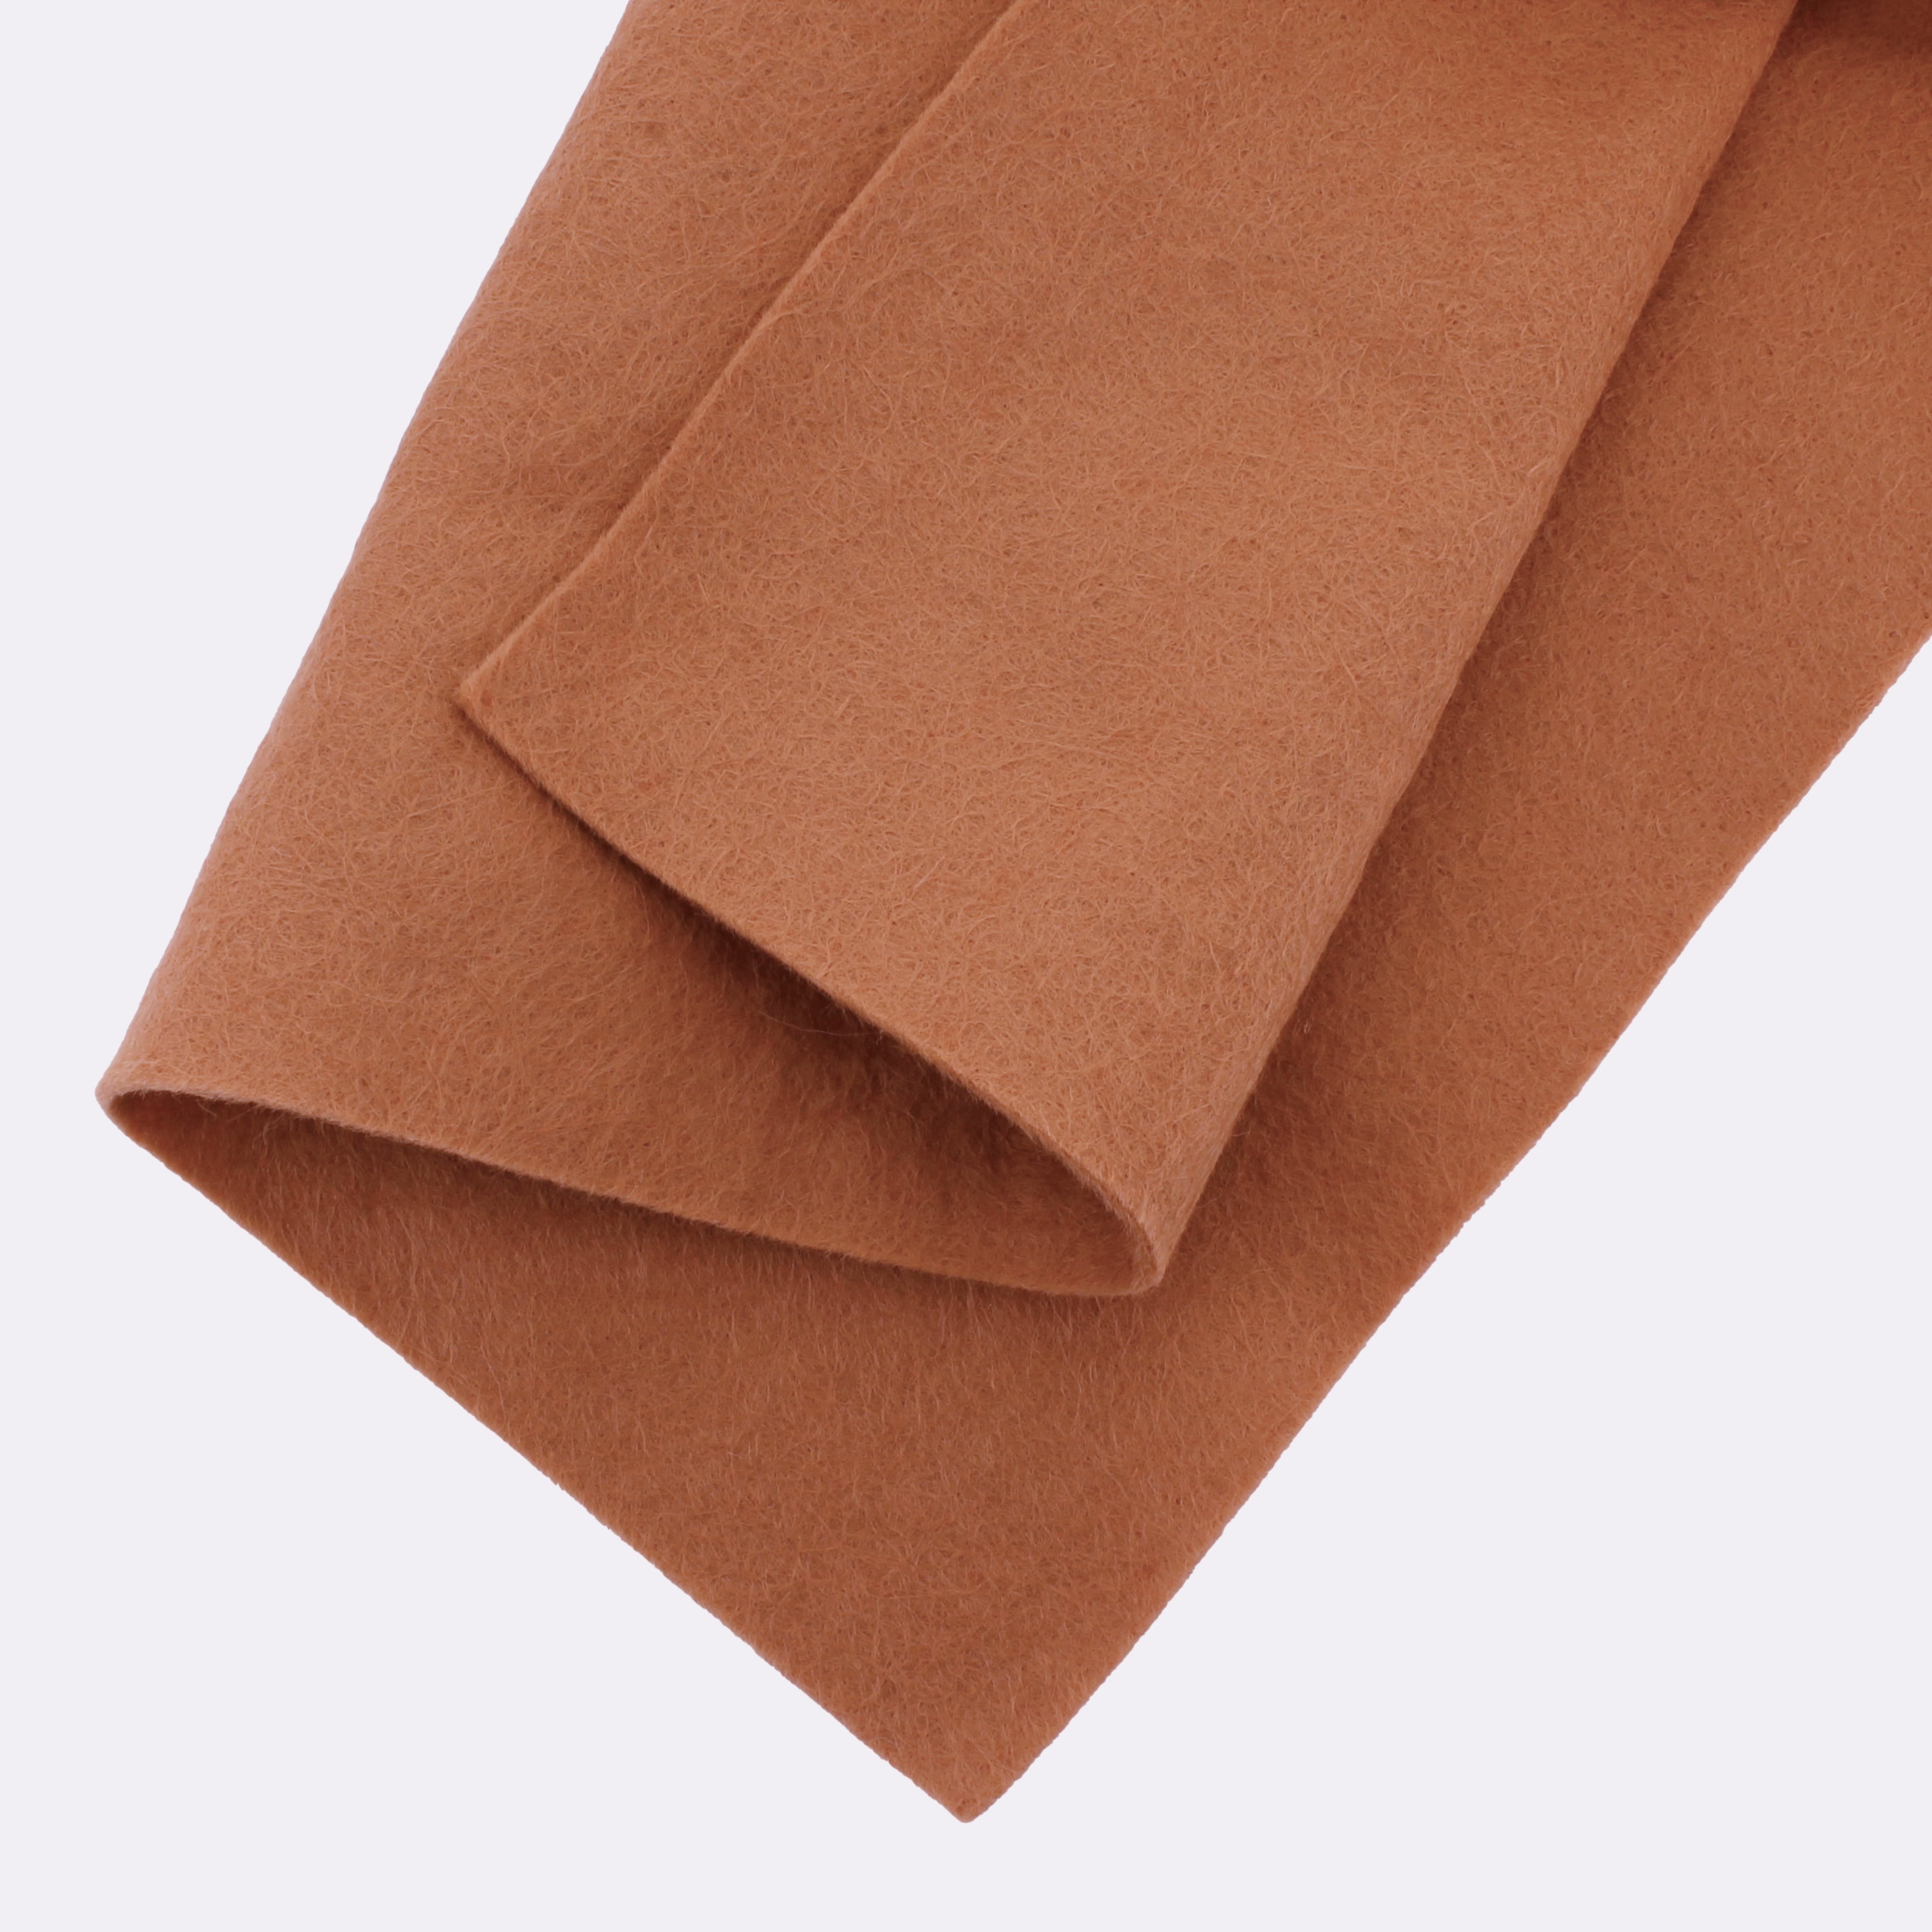  21 Felt Sheets - 12X12 inch Fall Colors Collection - Made in  USA - Merino Wool Blend Felt